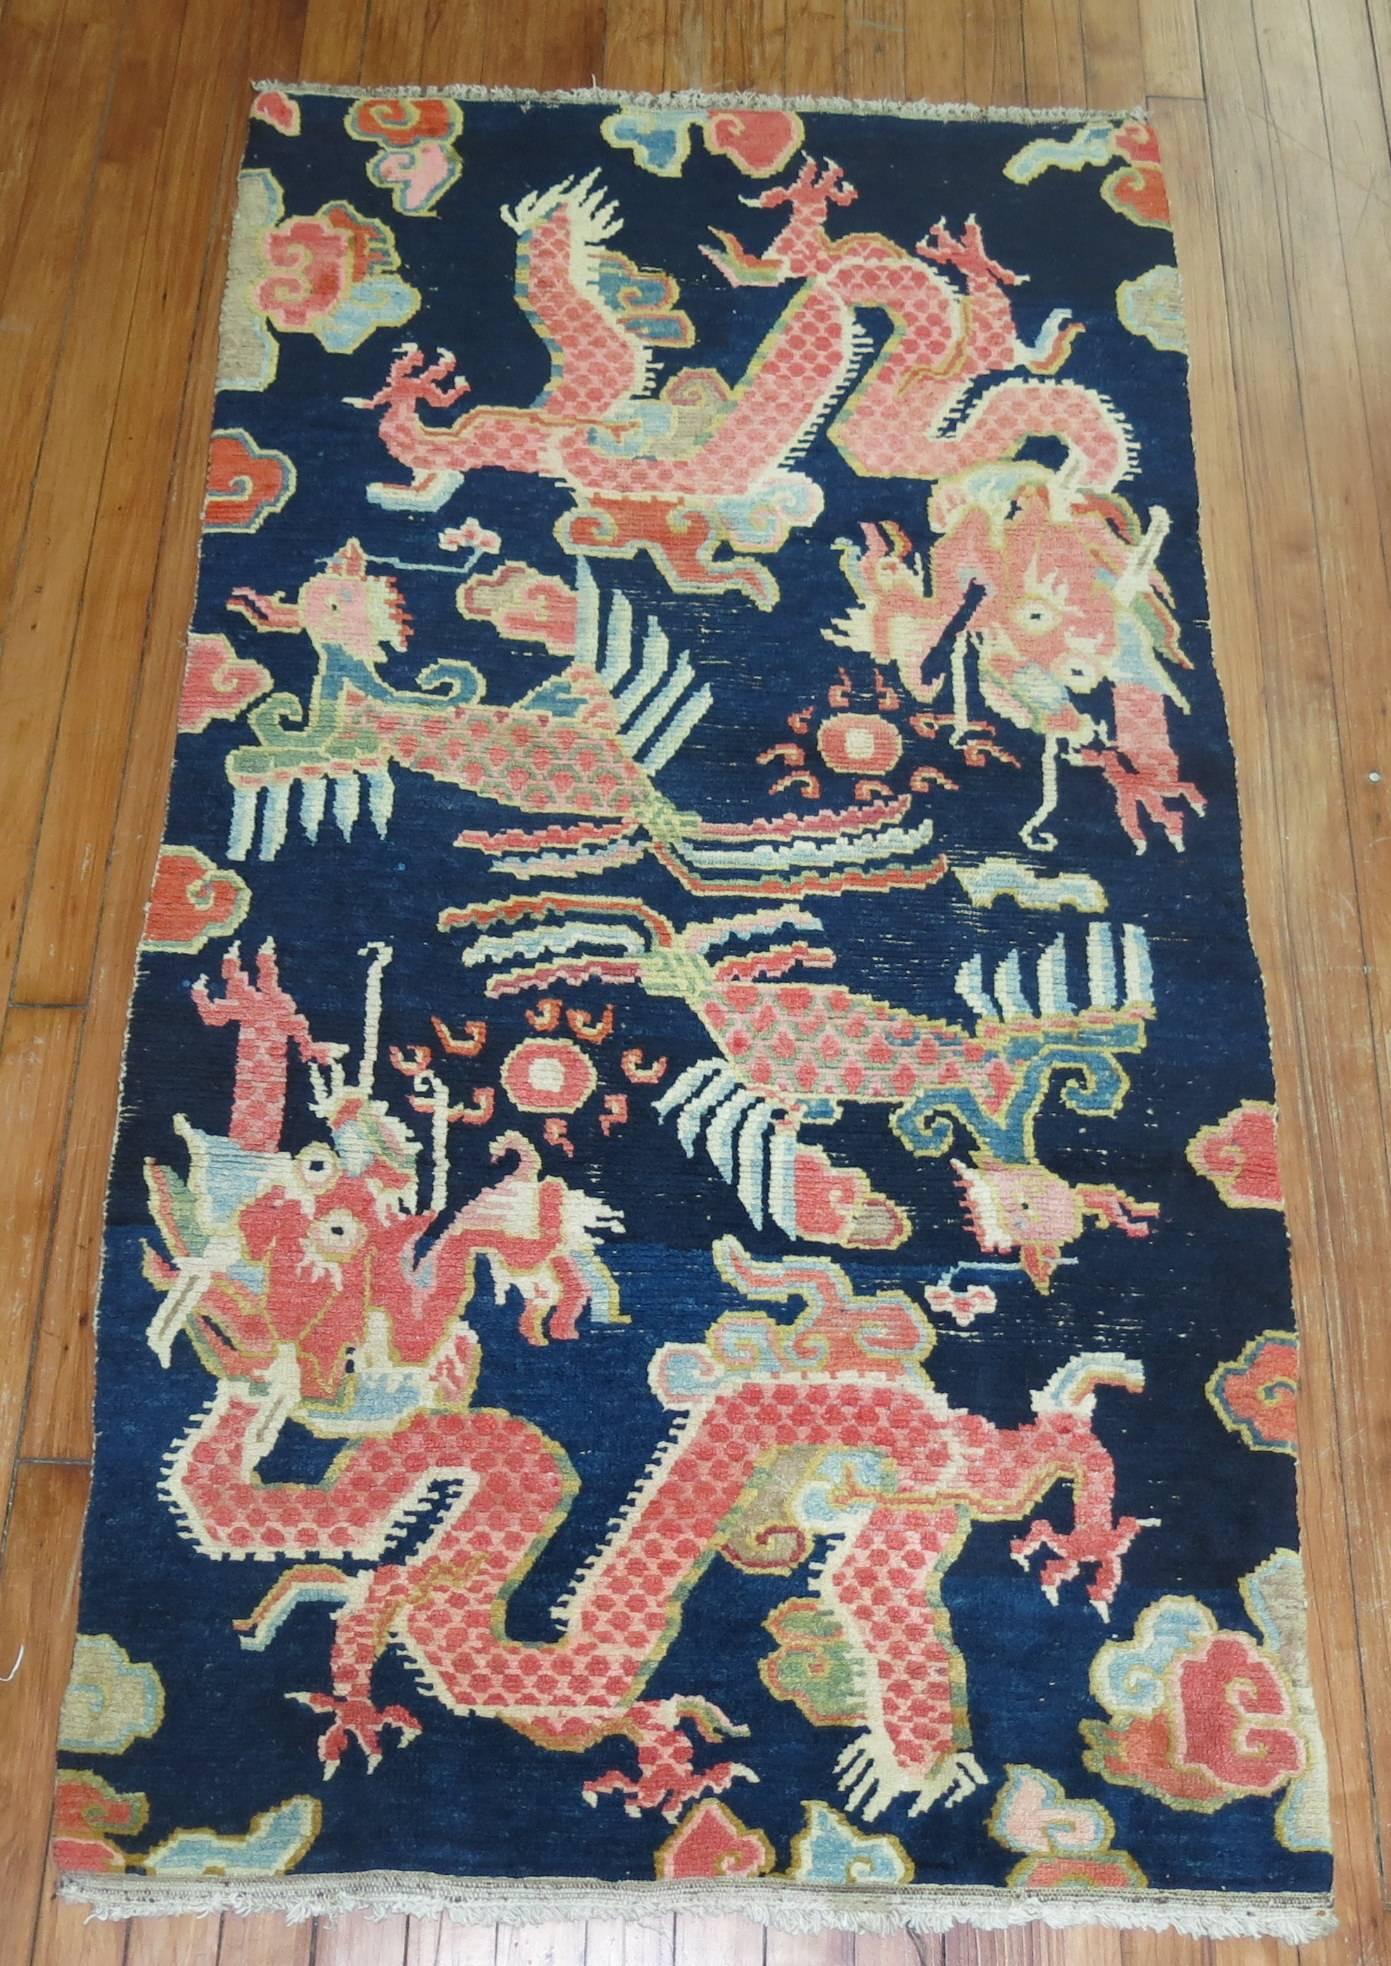 An antique tibetan rug with a dragon niche motif on a navy blue ground.

Tibetan rug making is an ancient, traditional craft. Tibetan rugs are traditionally made from Tibetan highland sheep's wool, called changpel. Tibetans use rugs for many